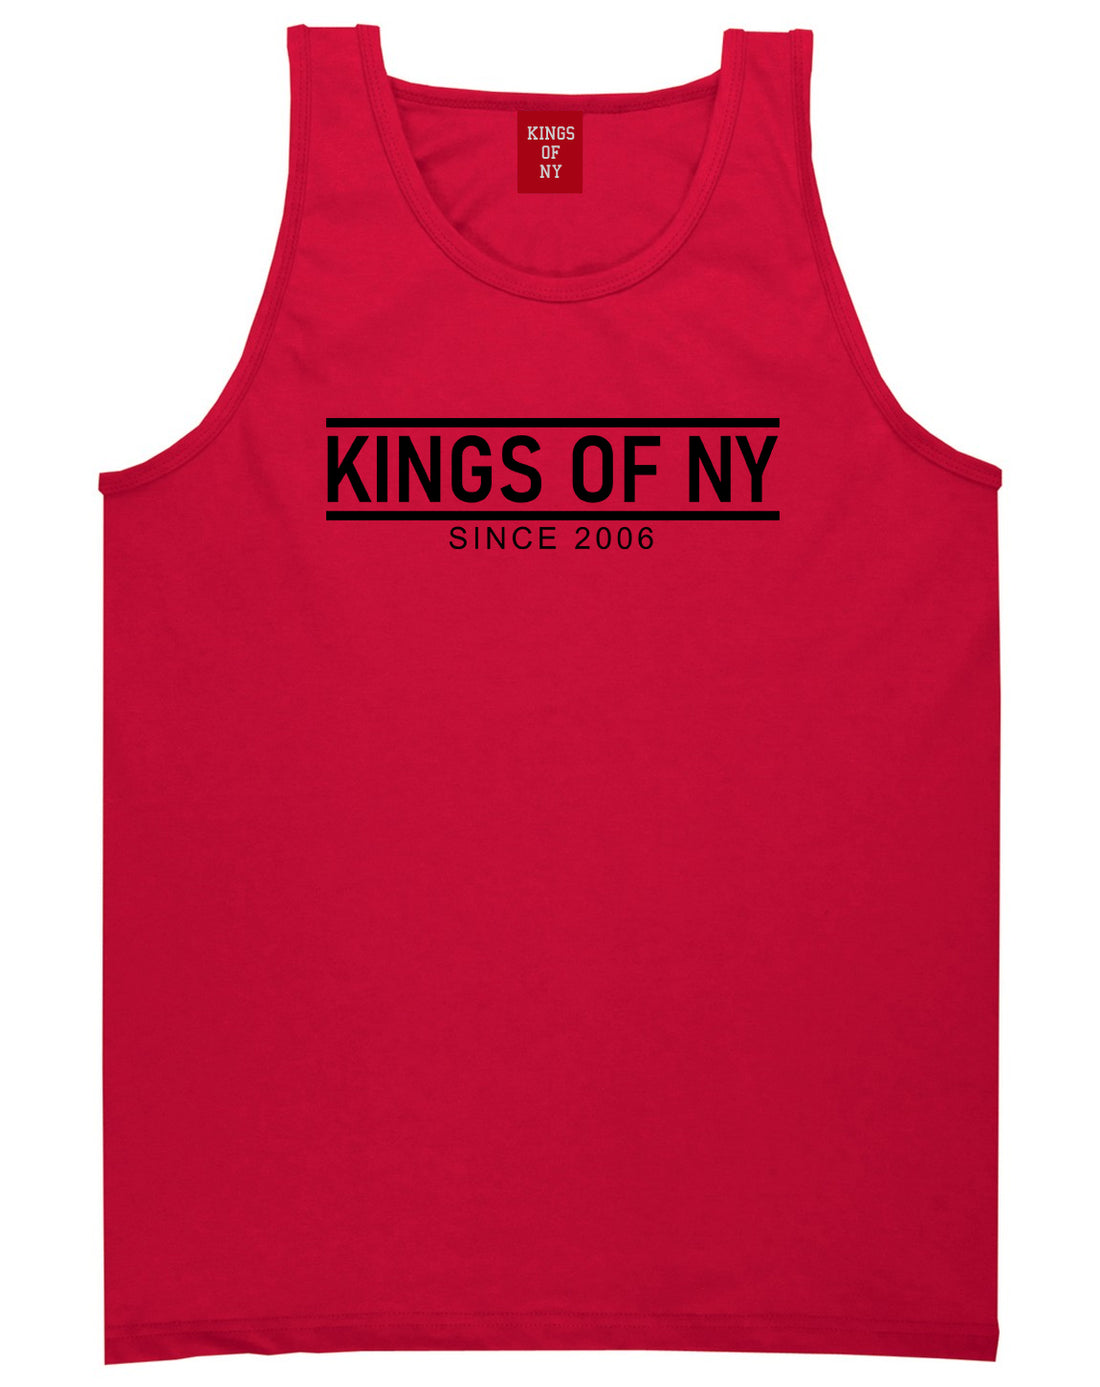 KINGS OF NY City Lines 2006 Mens Tank Top T-Shirt Red